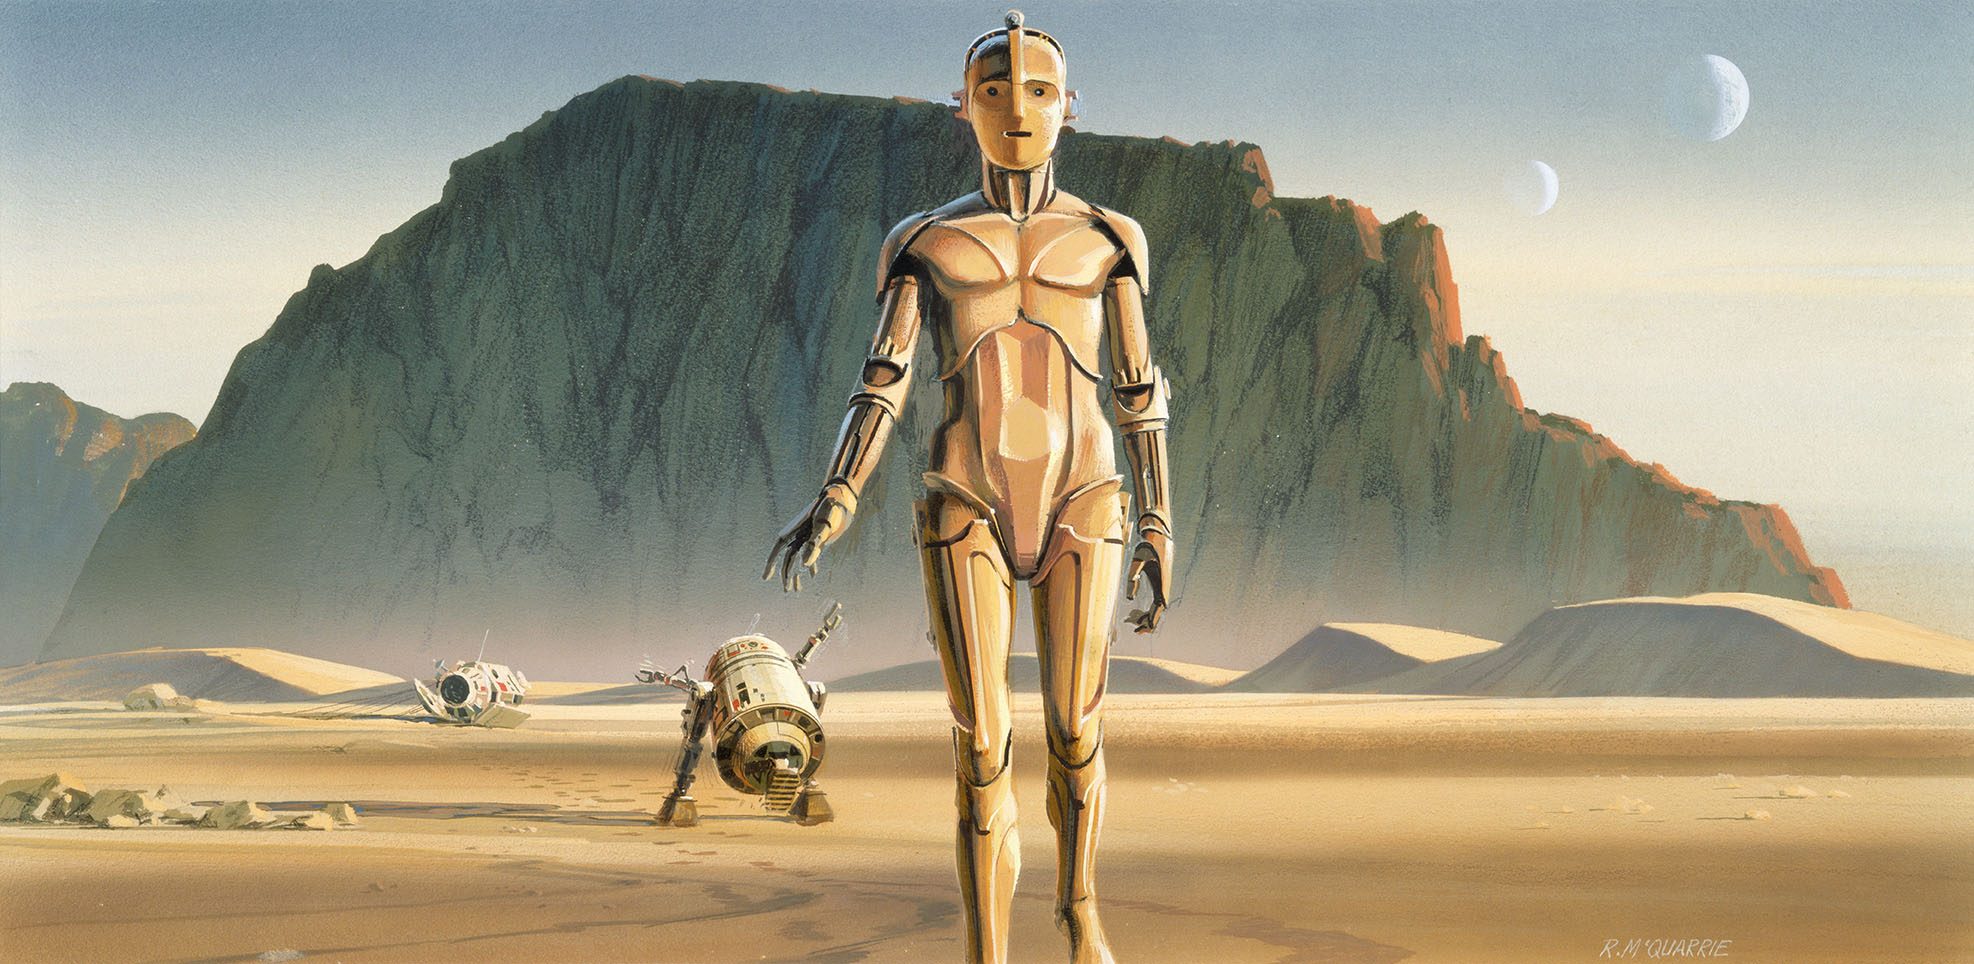 Ralph McQuarrie, production painting for Star Wars Episode IV: A New Hope (Artoo and Threepio leave the pod in the desert), January 31, 1975